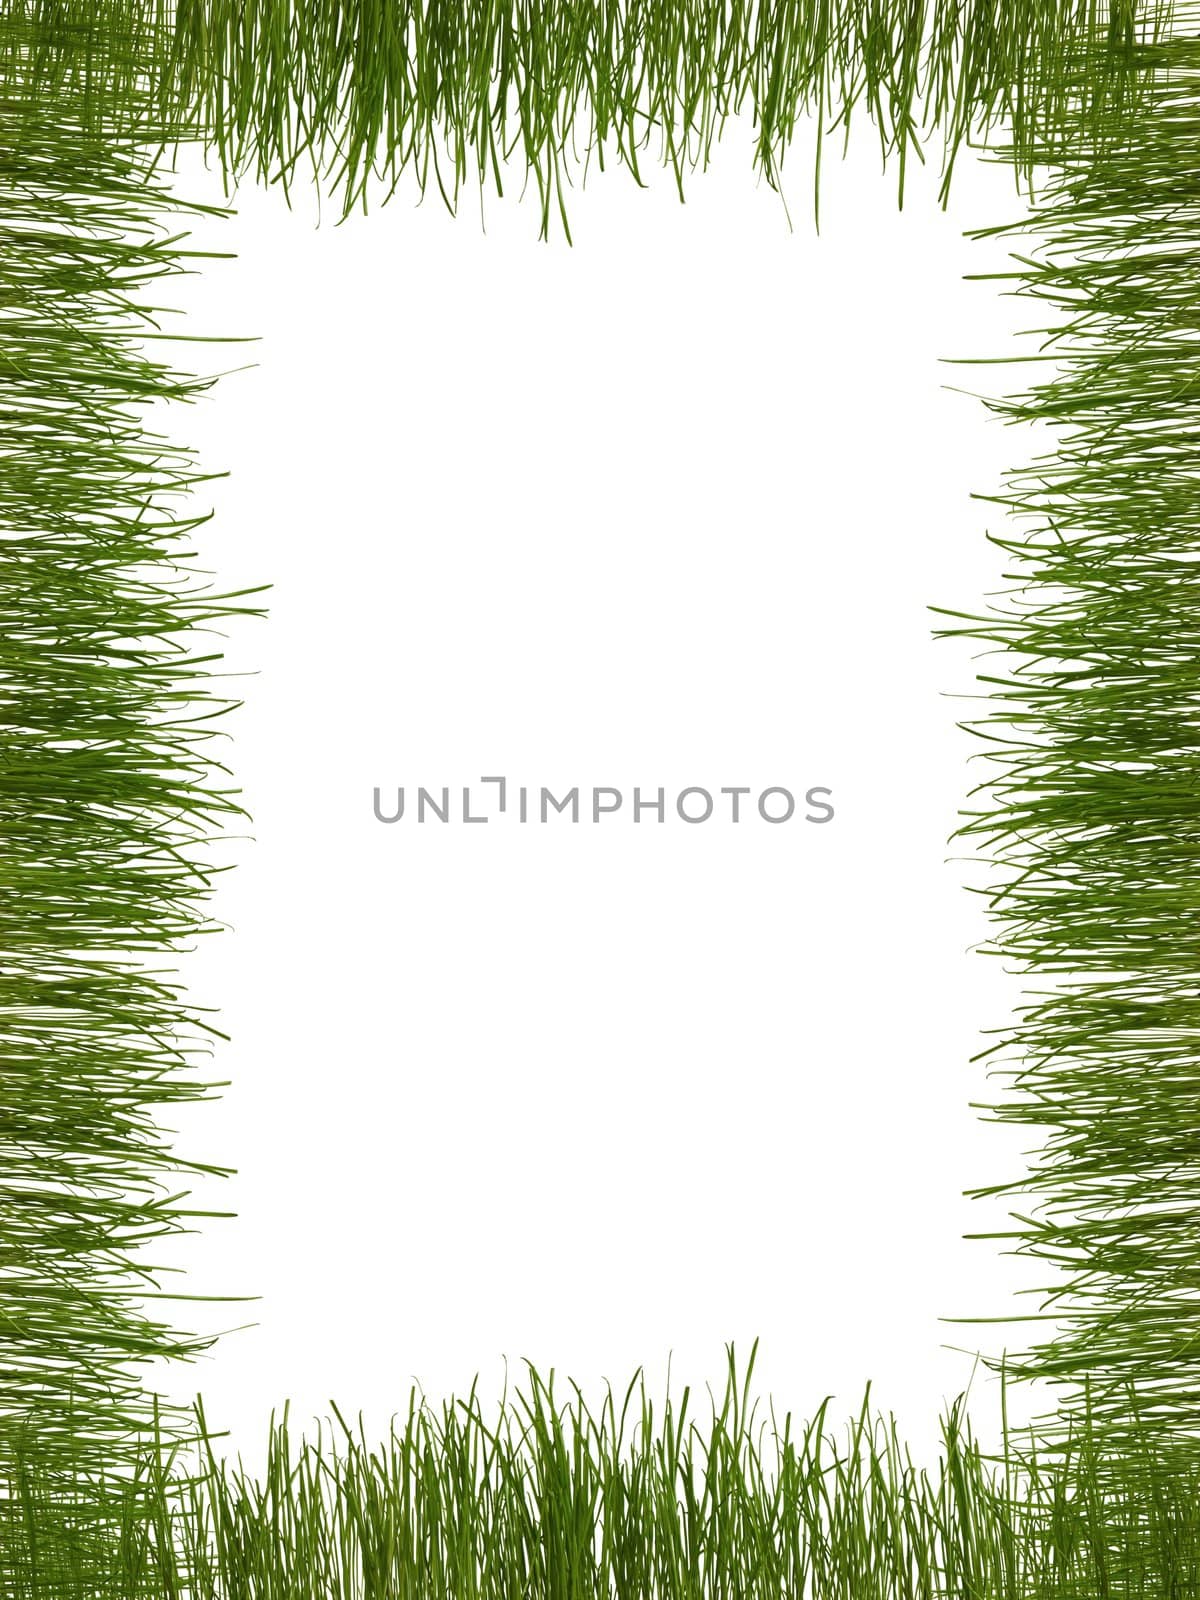 An image of frame of green grass